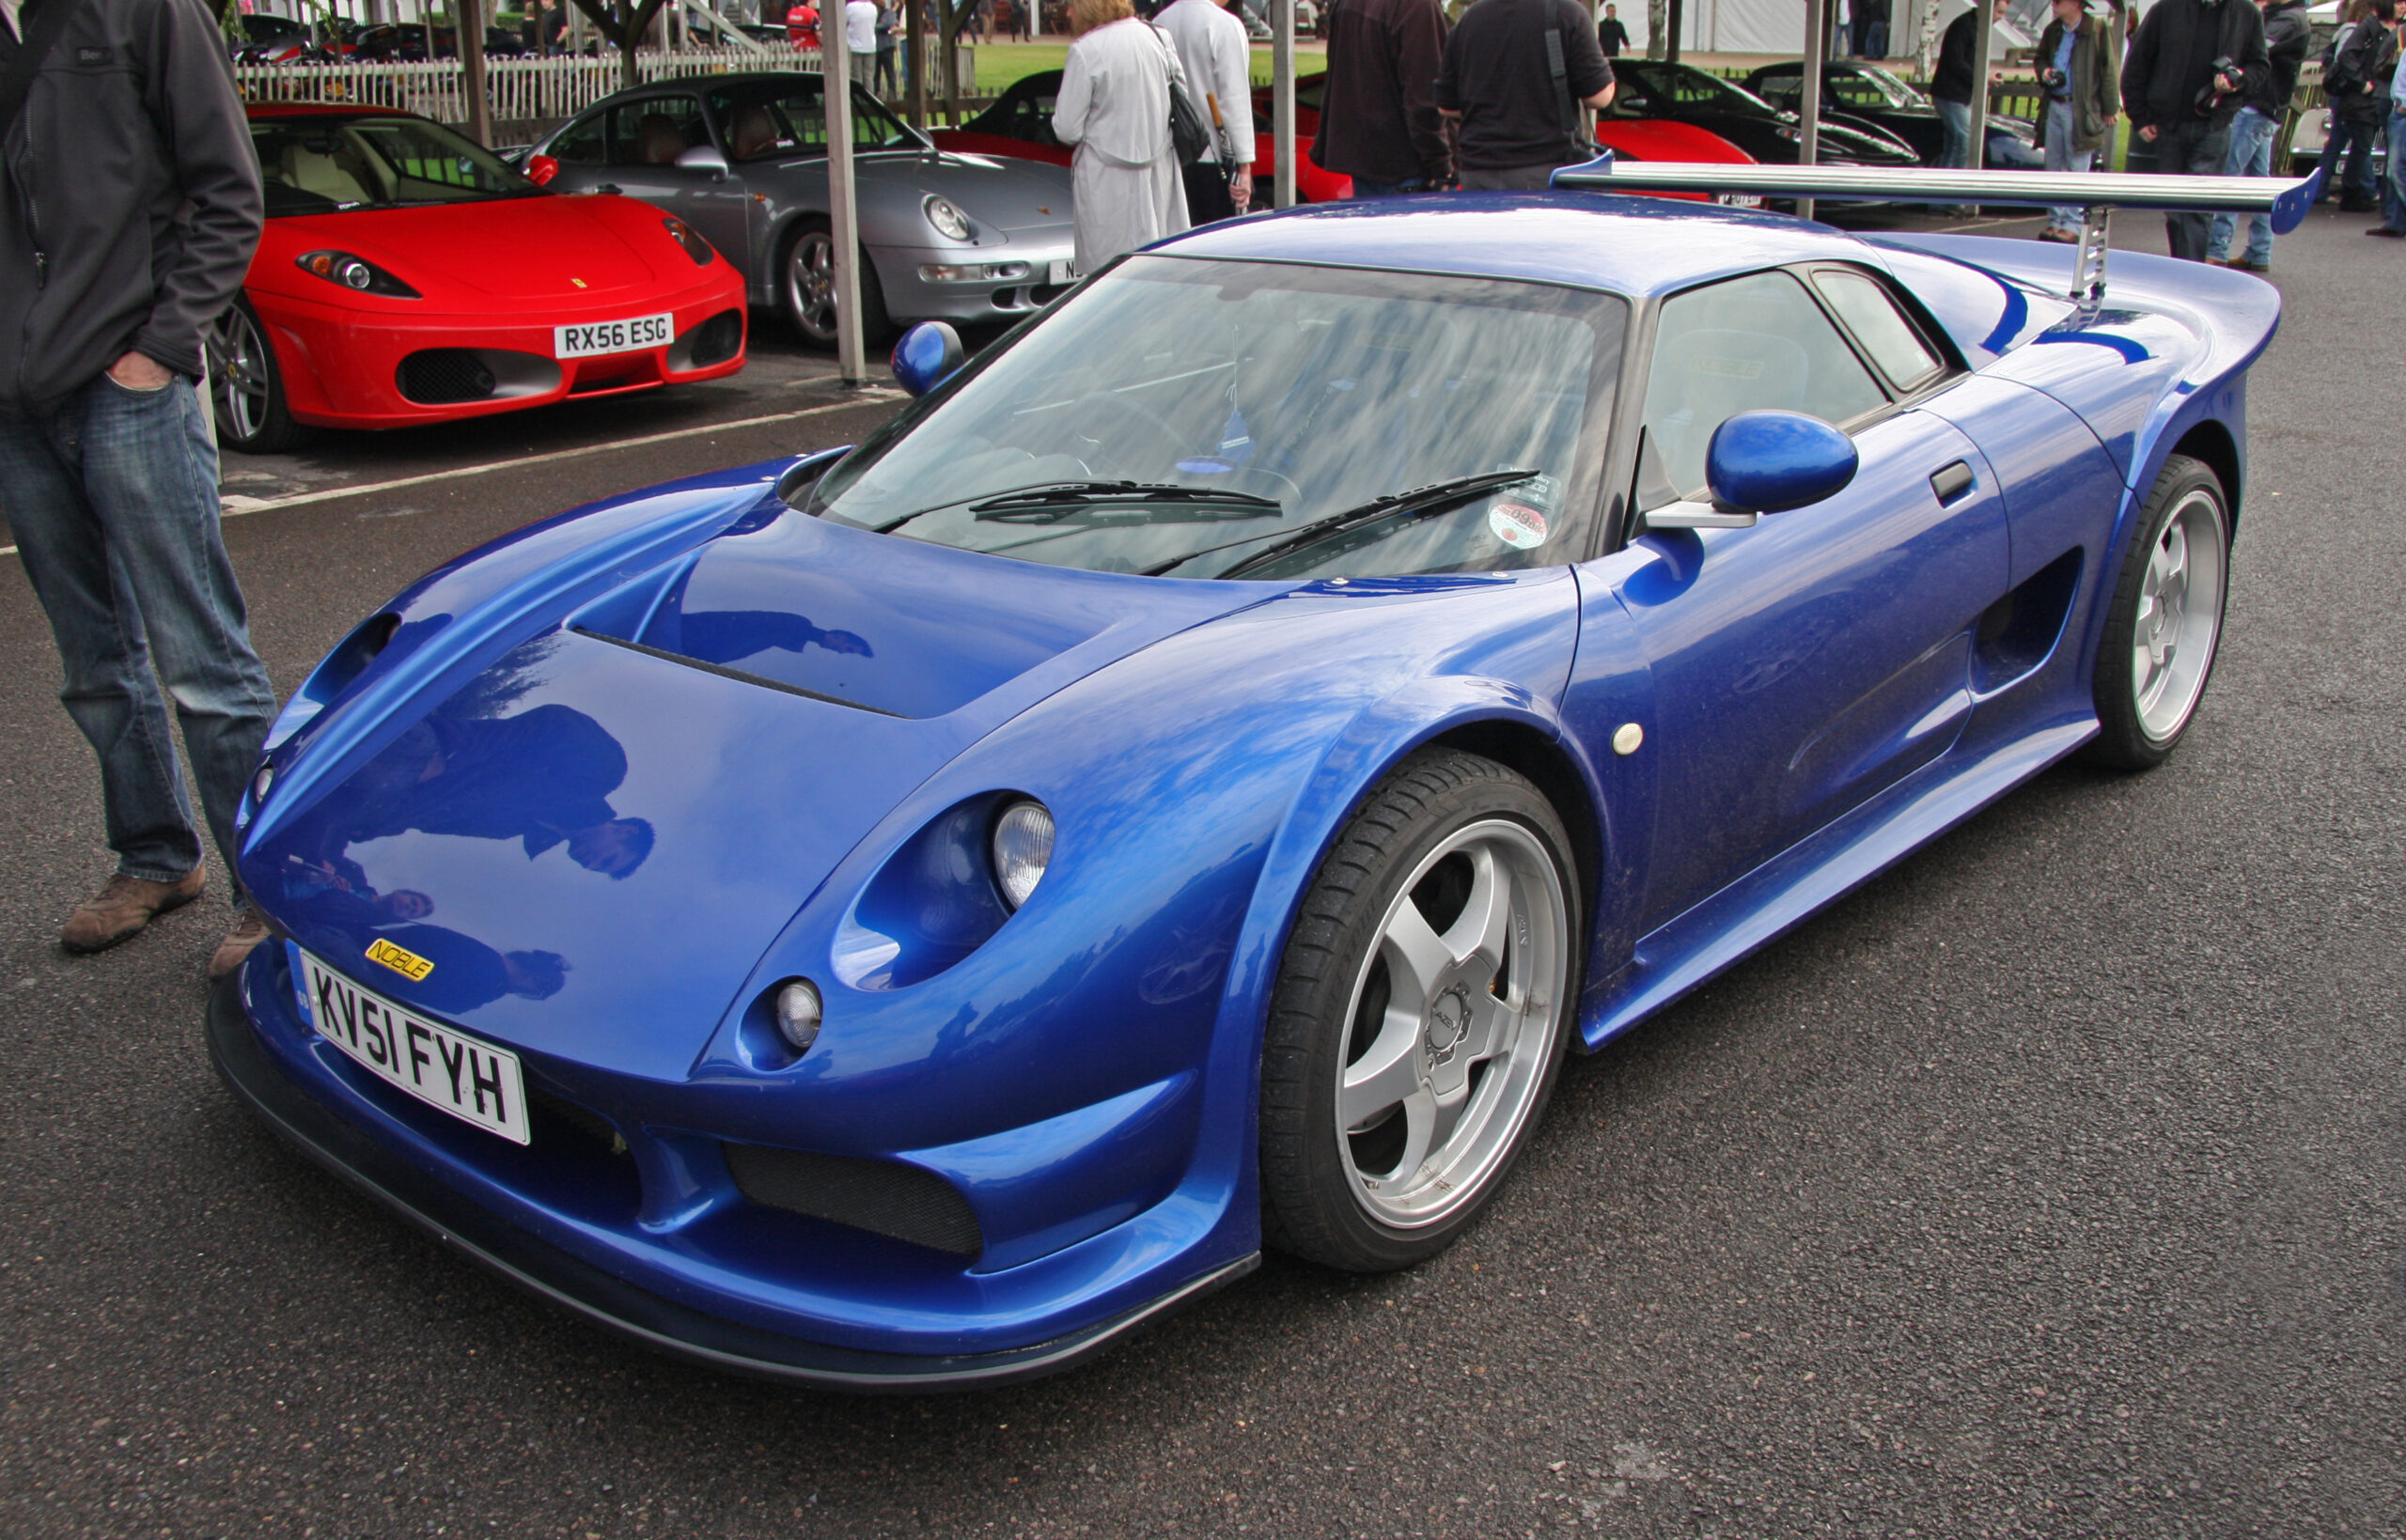 The Noble M12 GTO